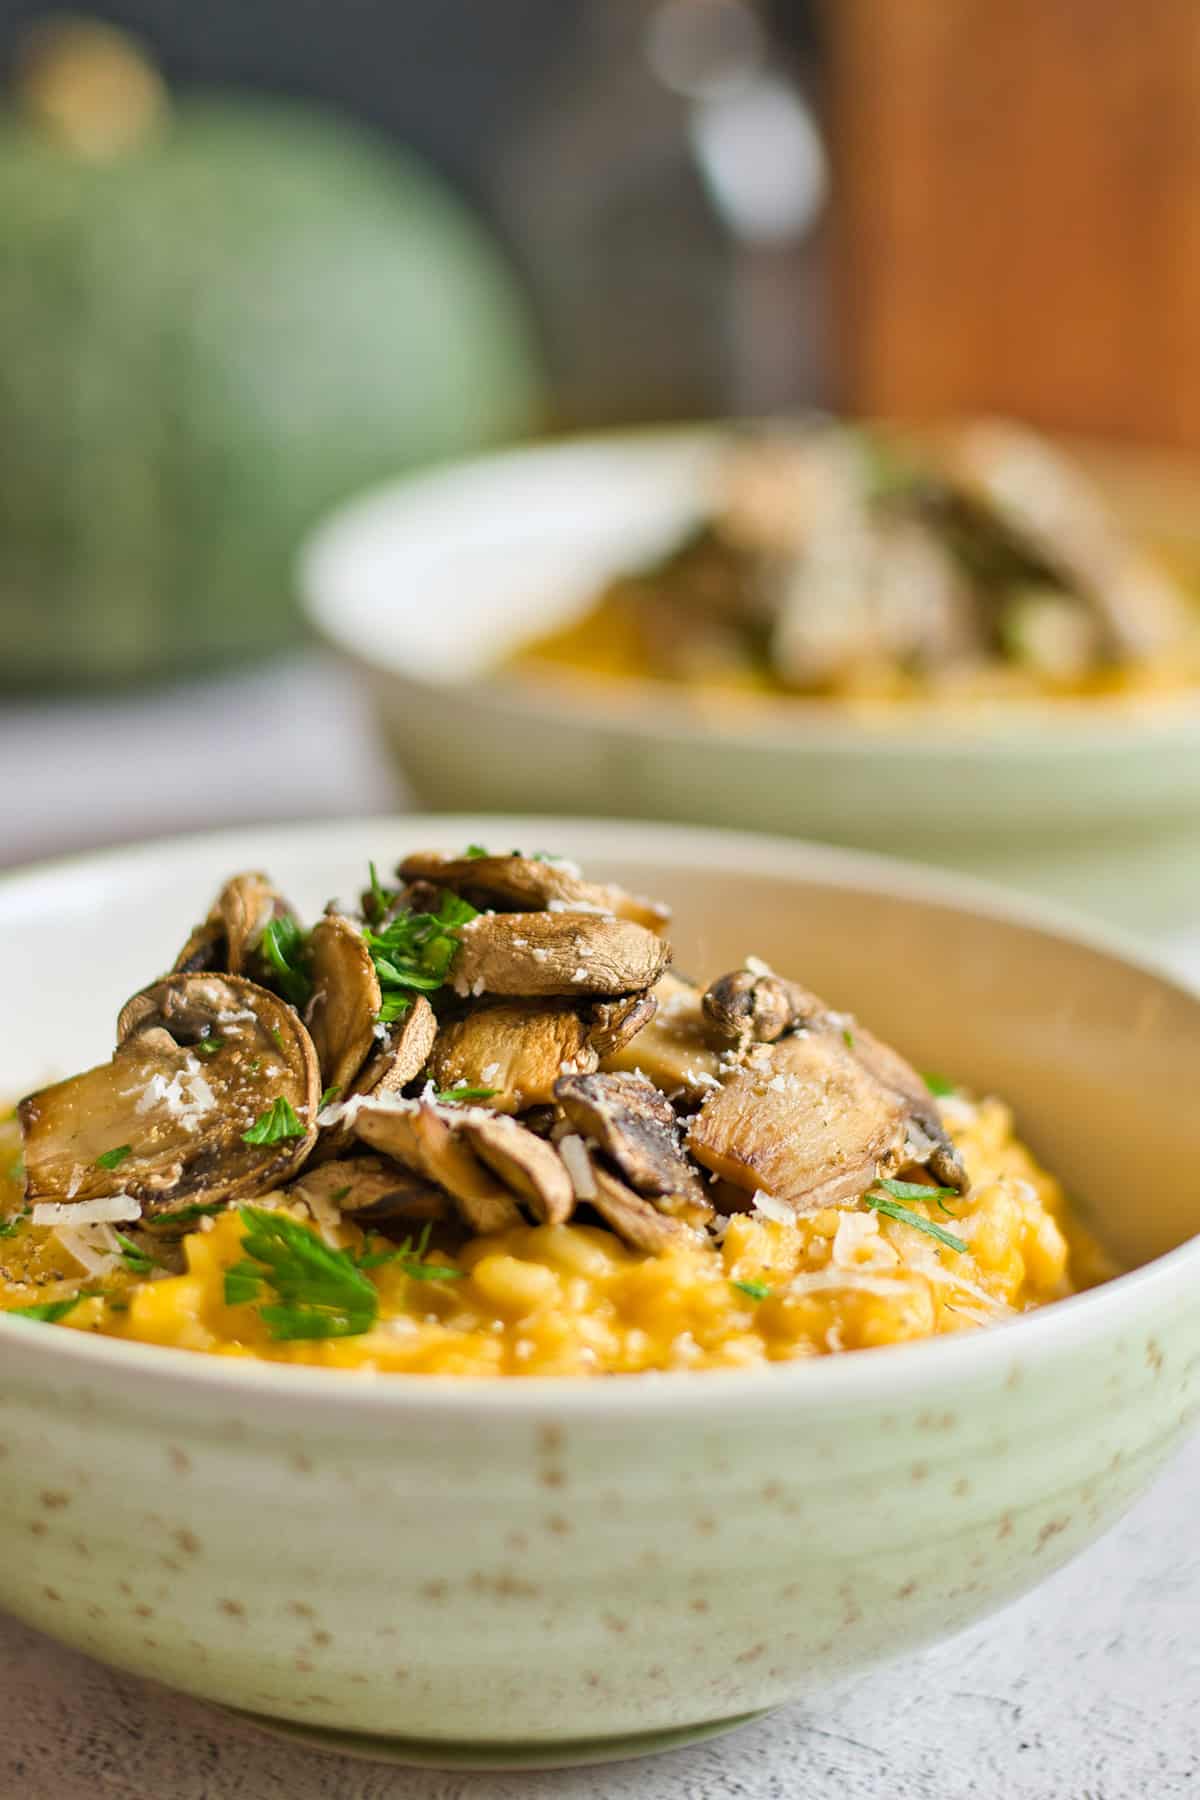 Garnishing top of risotto with fried mushrooms.